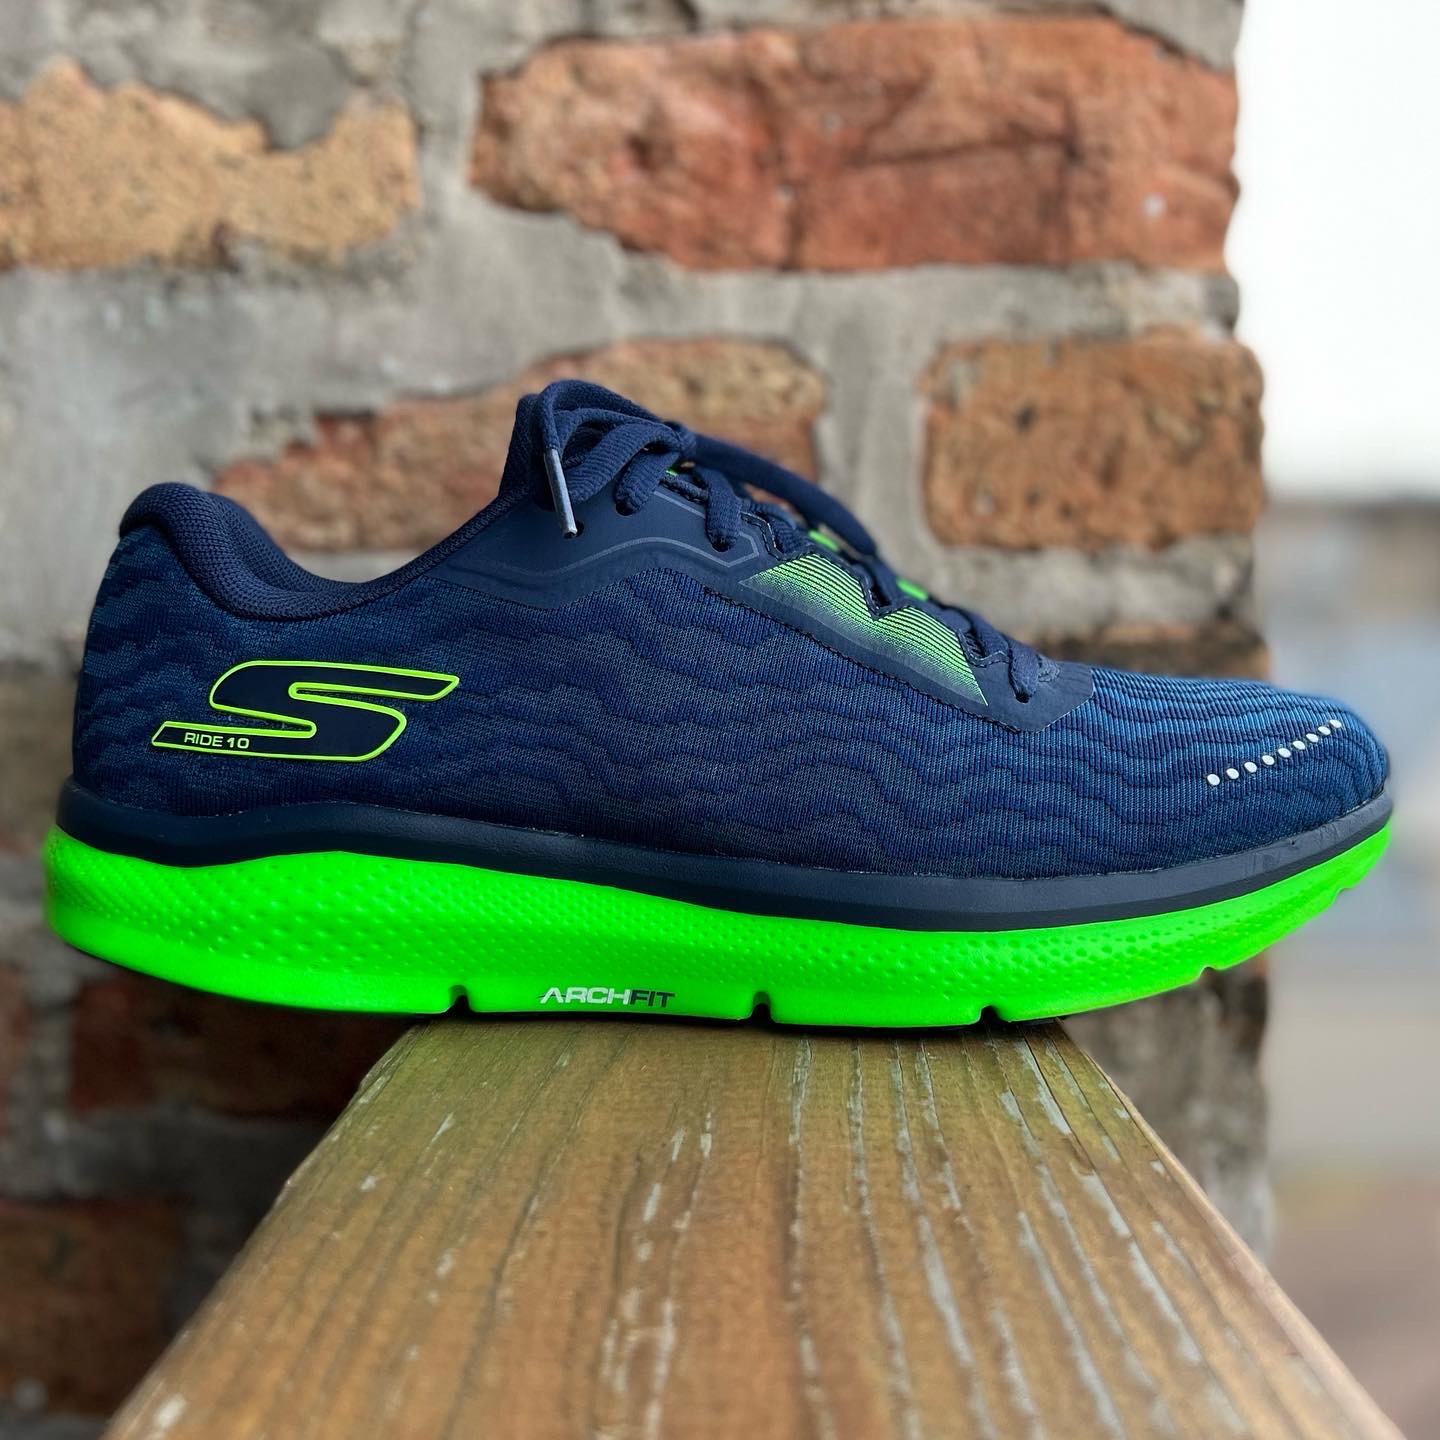 spids Civic Daggry Road Trail Run: Skechers Performance GO Run Ride 10 Multi Tester Review at  50 Miles Plus: A Pleasant Light Everyday Trainer